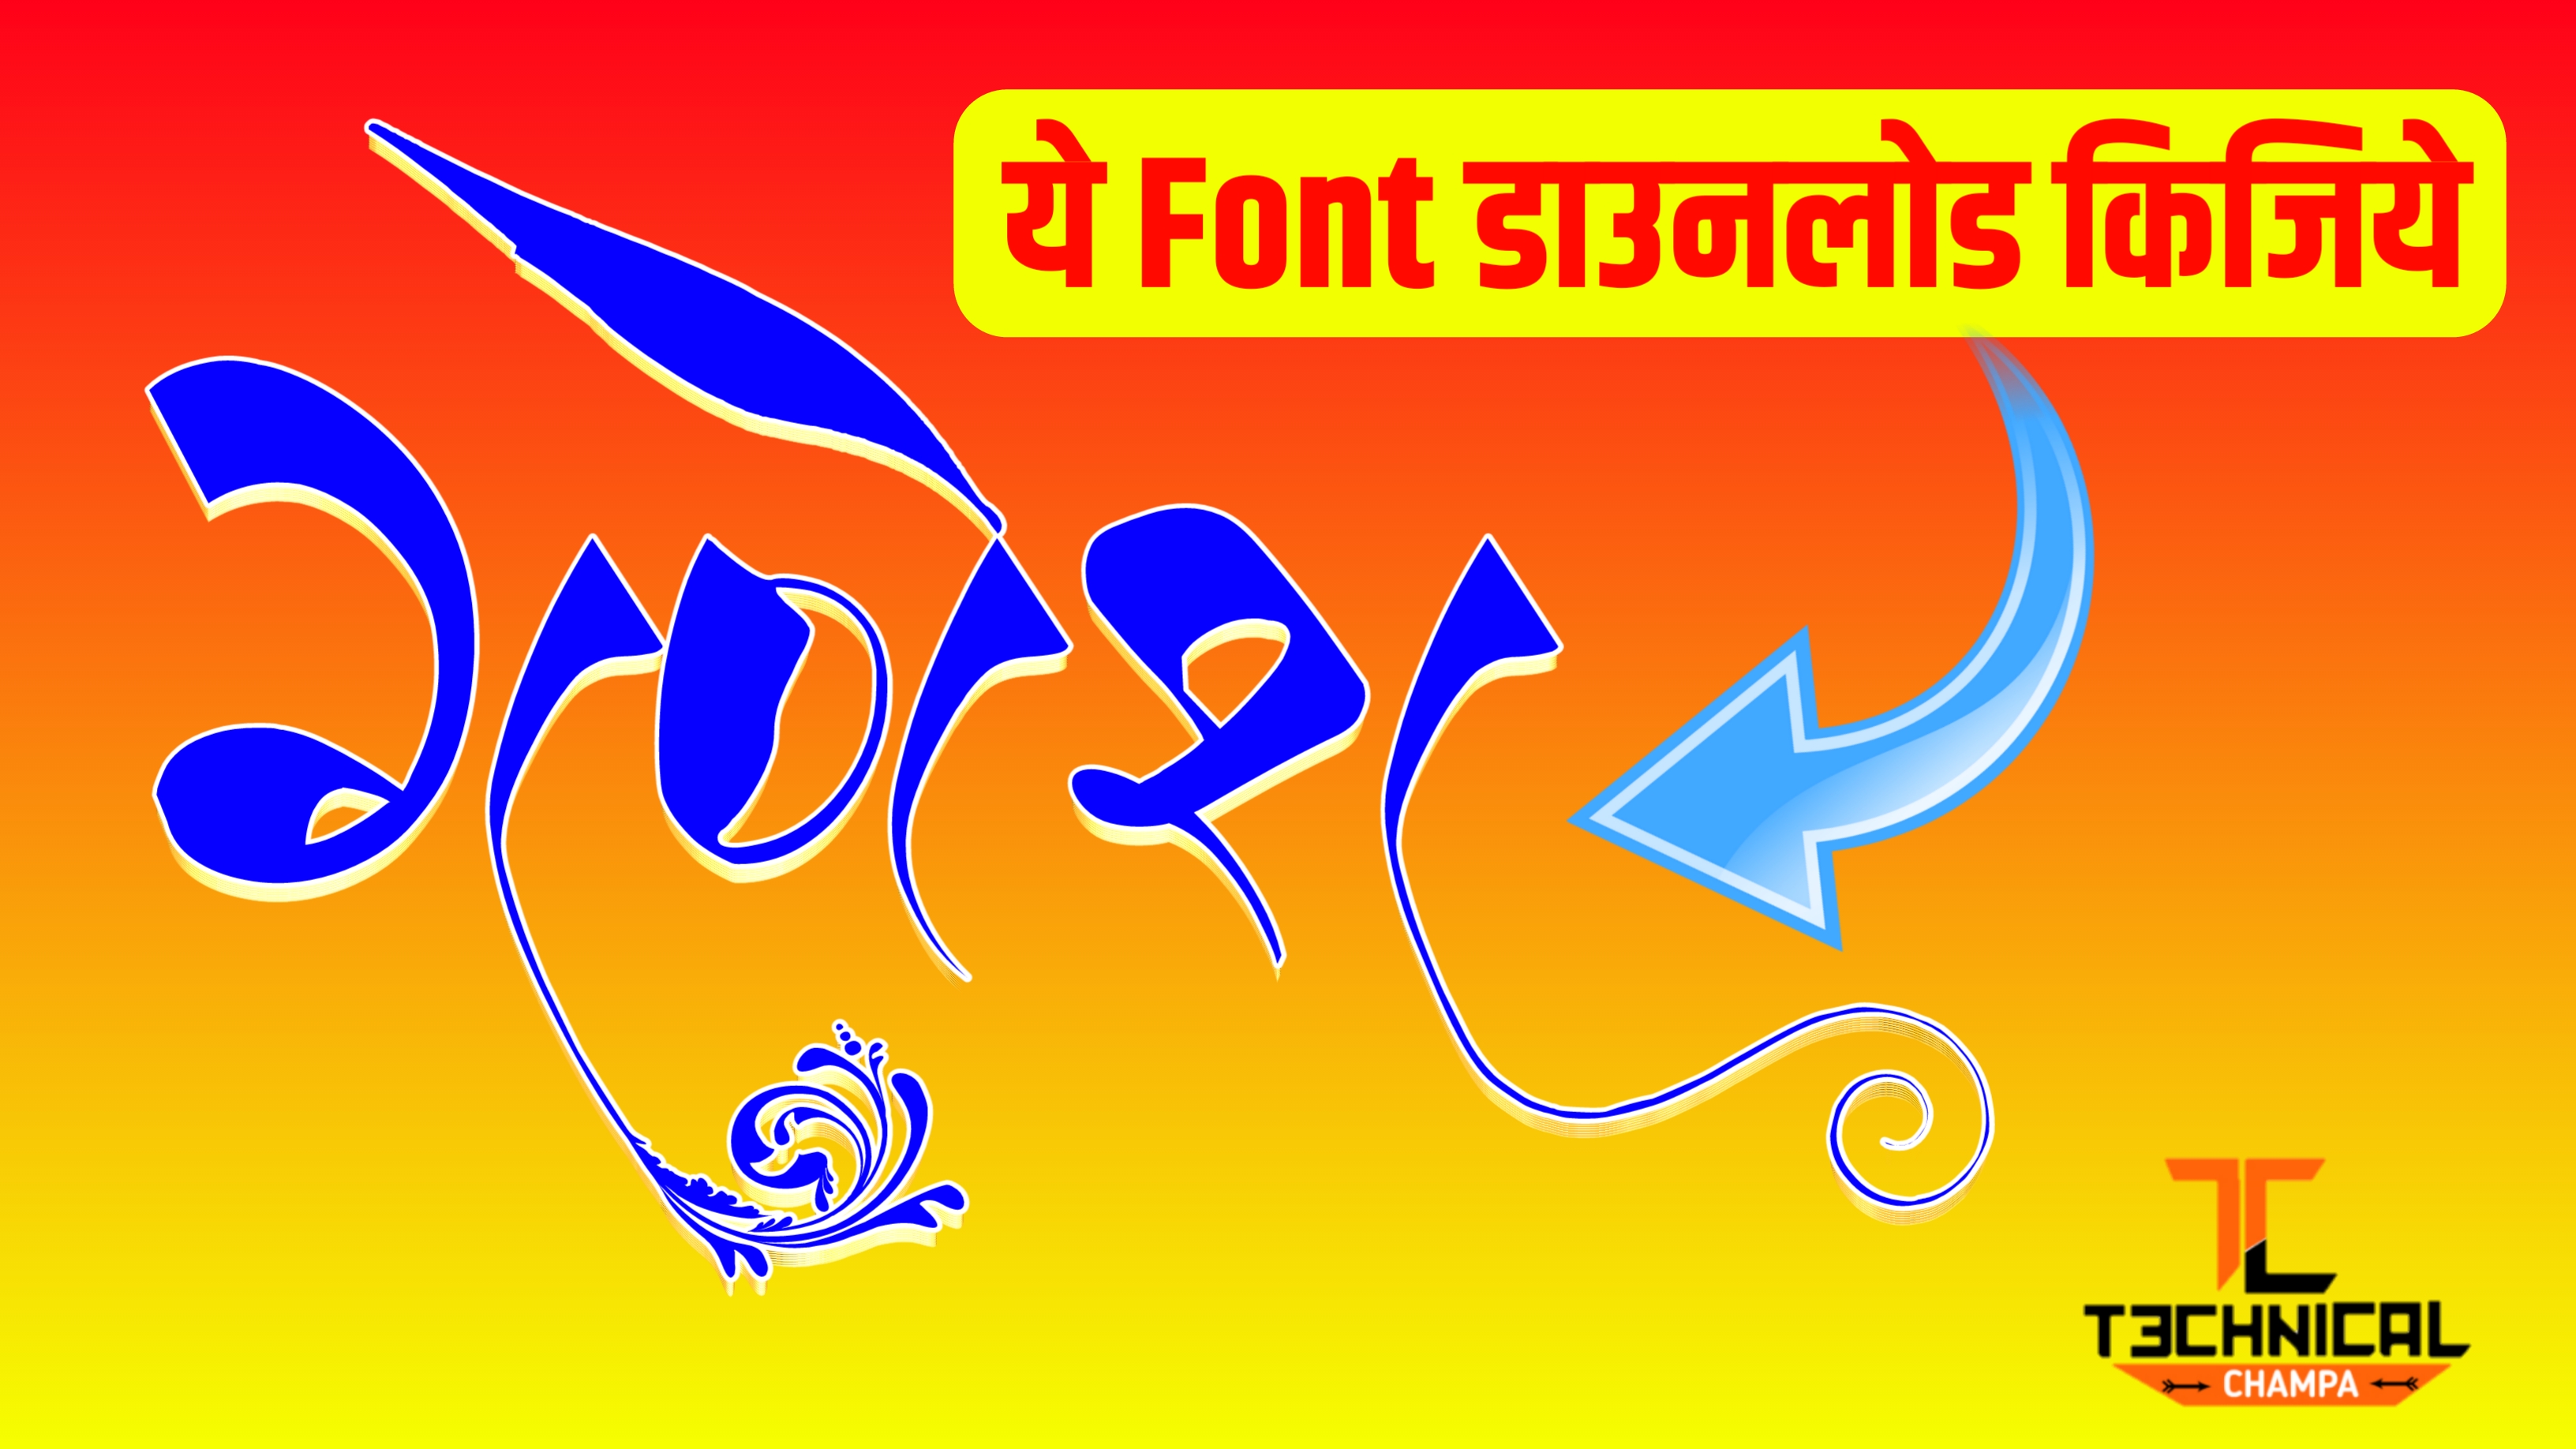 Ams Calligraphy Font Technical Champa